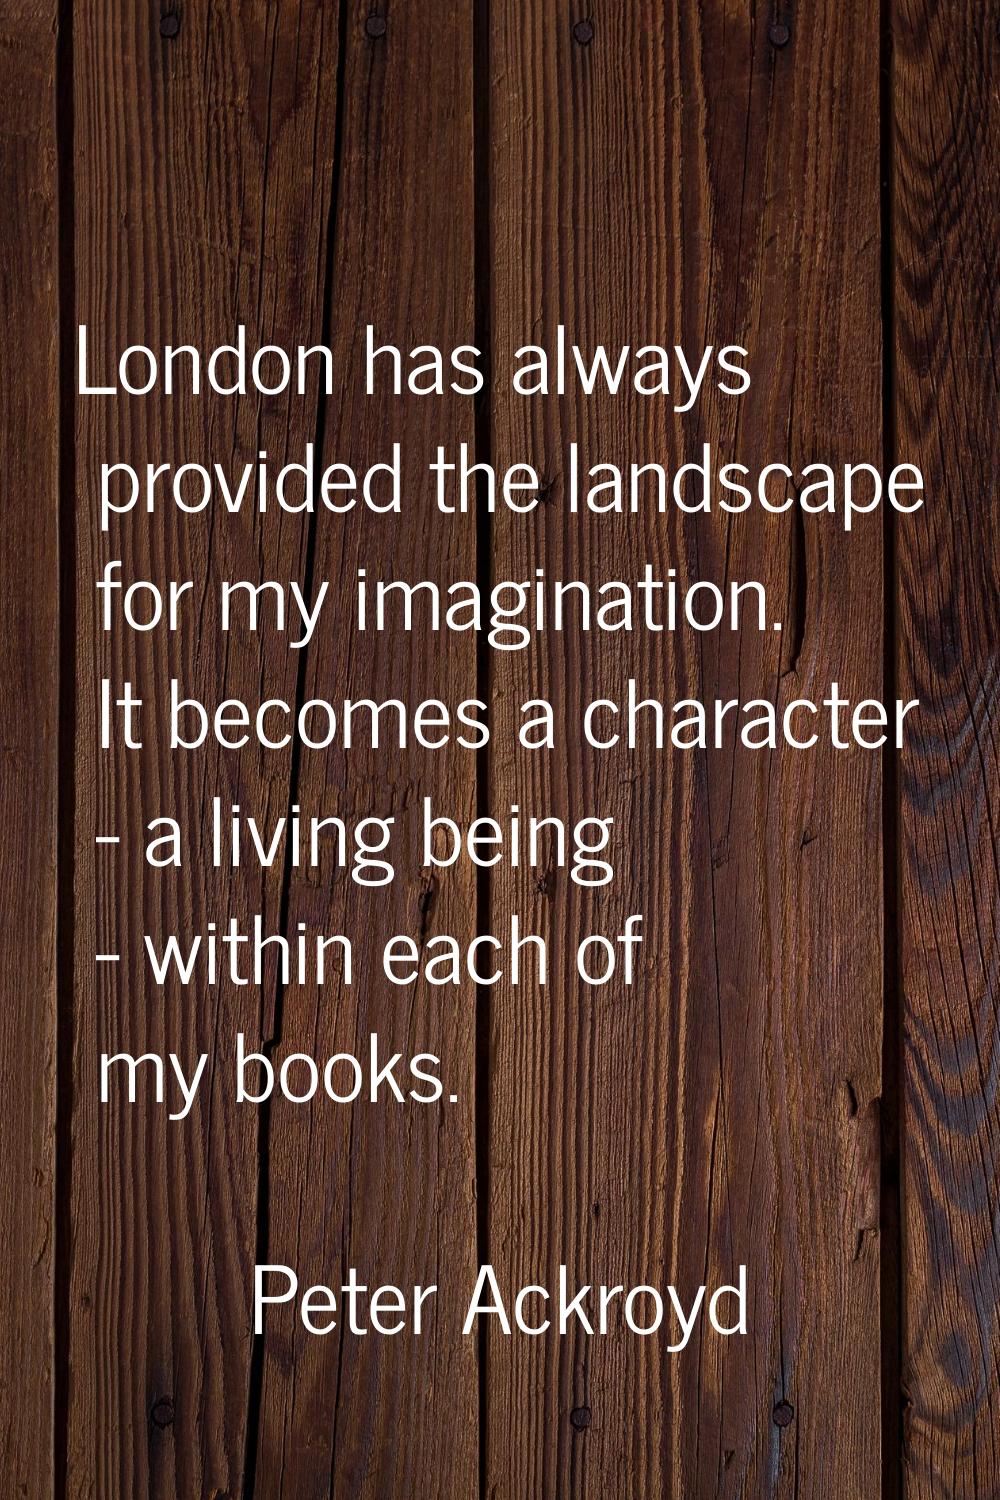 London has always provided the landscape for my imagination. It becomes a character - a living bein